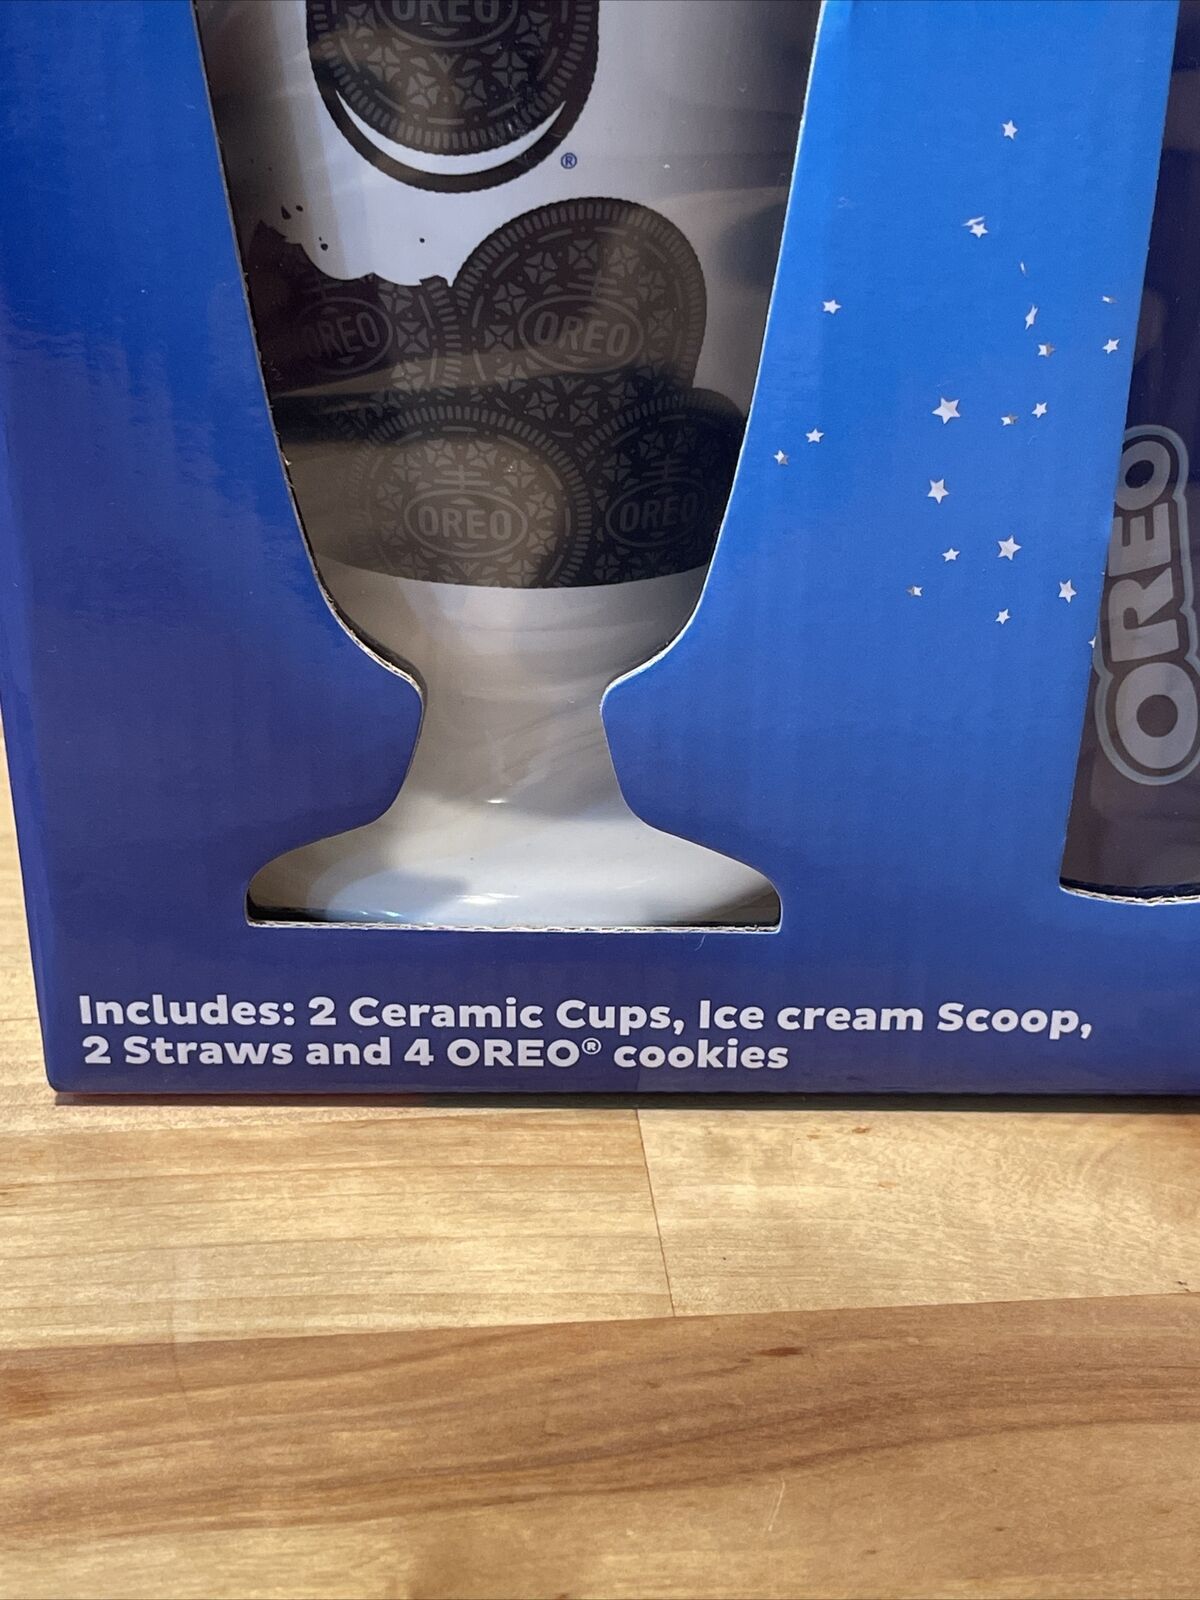 Oreo milkshake kit by @frankfordcandy Comes with a cup, two cookies and  vanilla milkshake mix!! Found @fivebelow : : : #new #cookies…